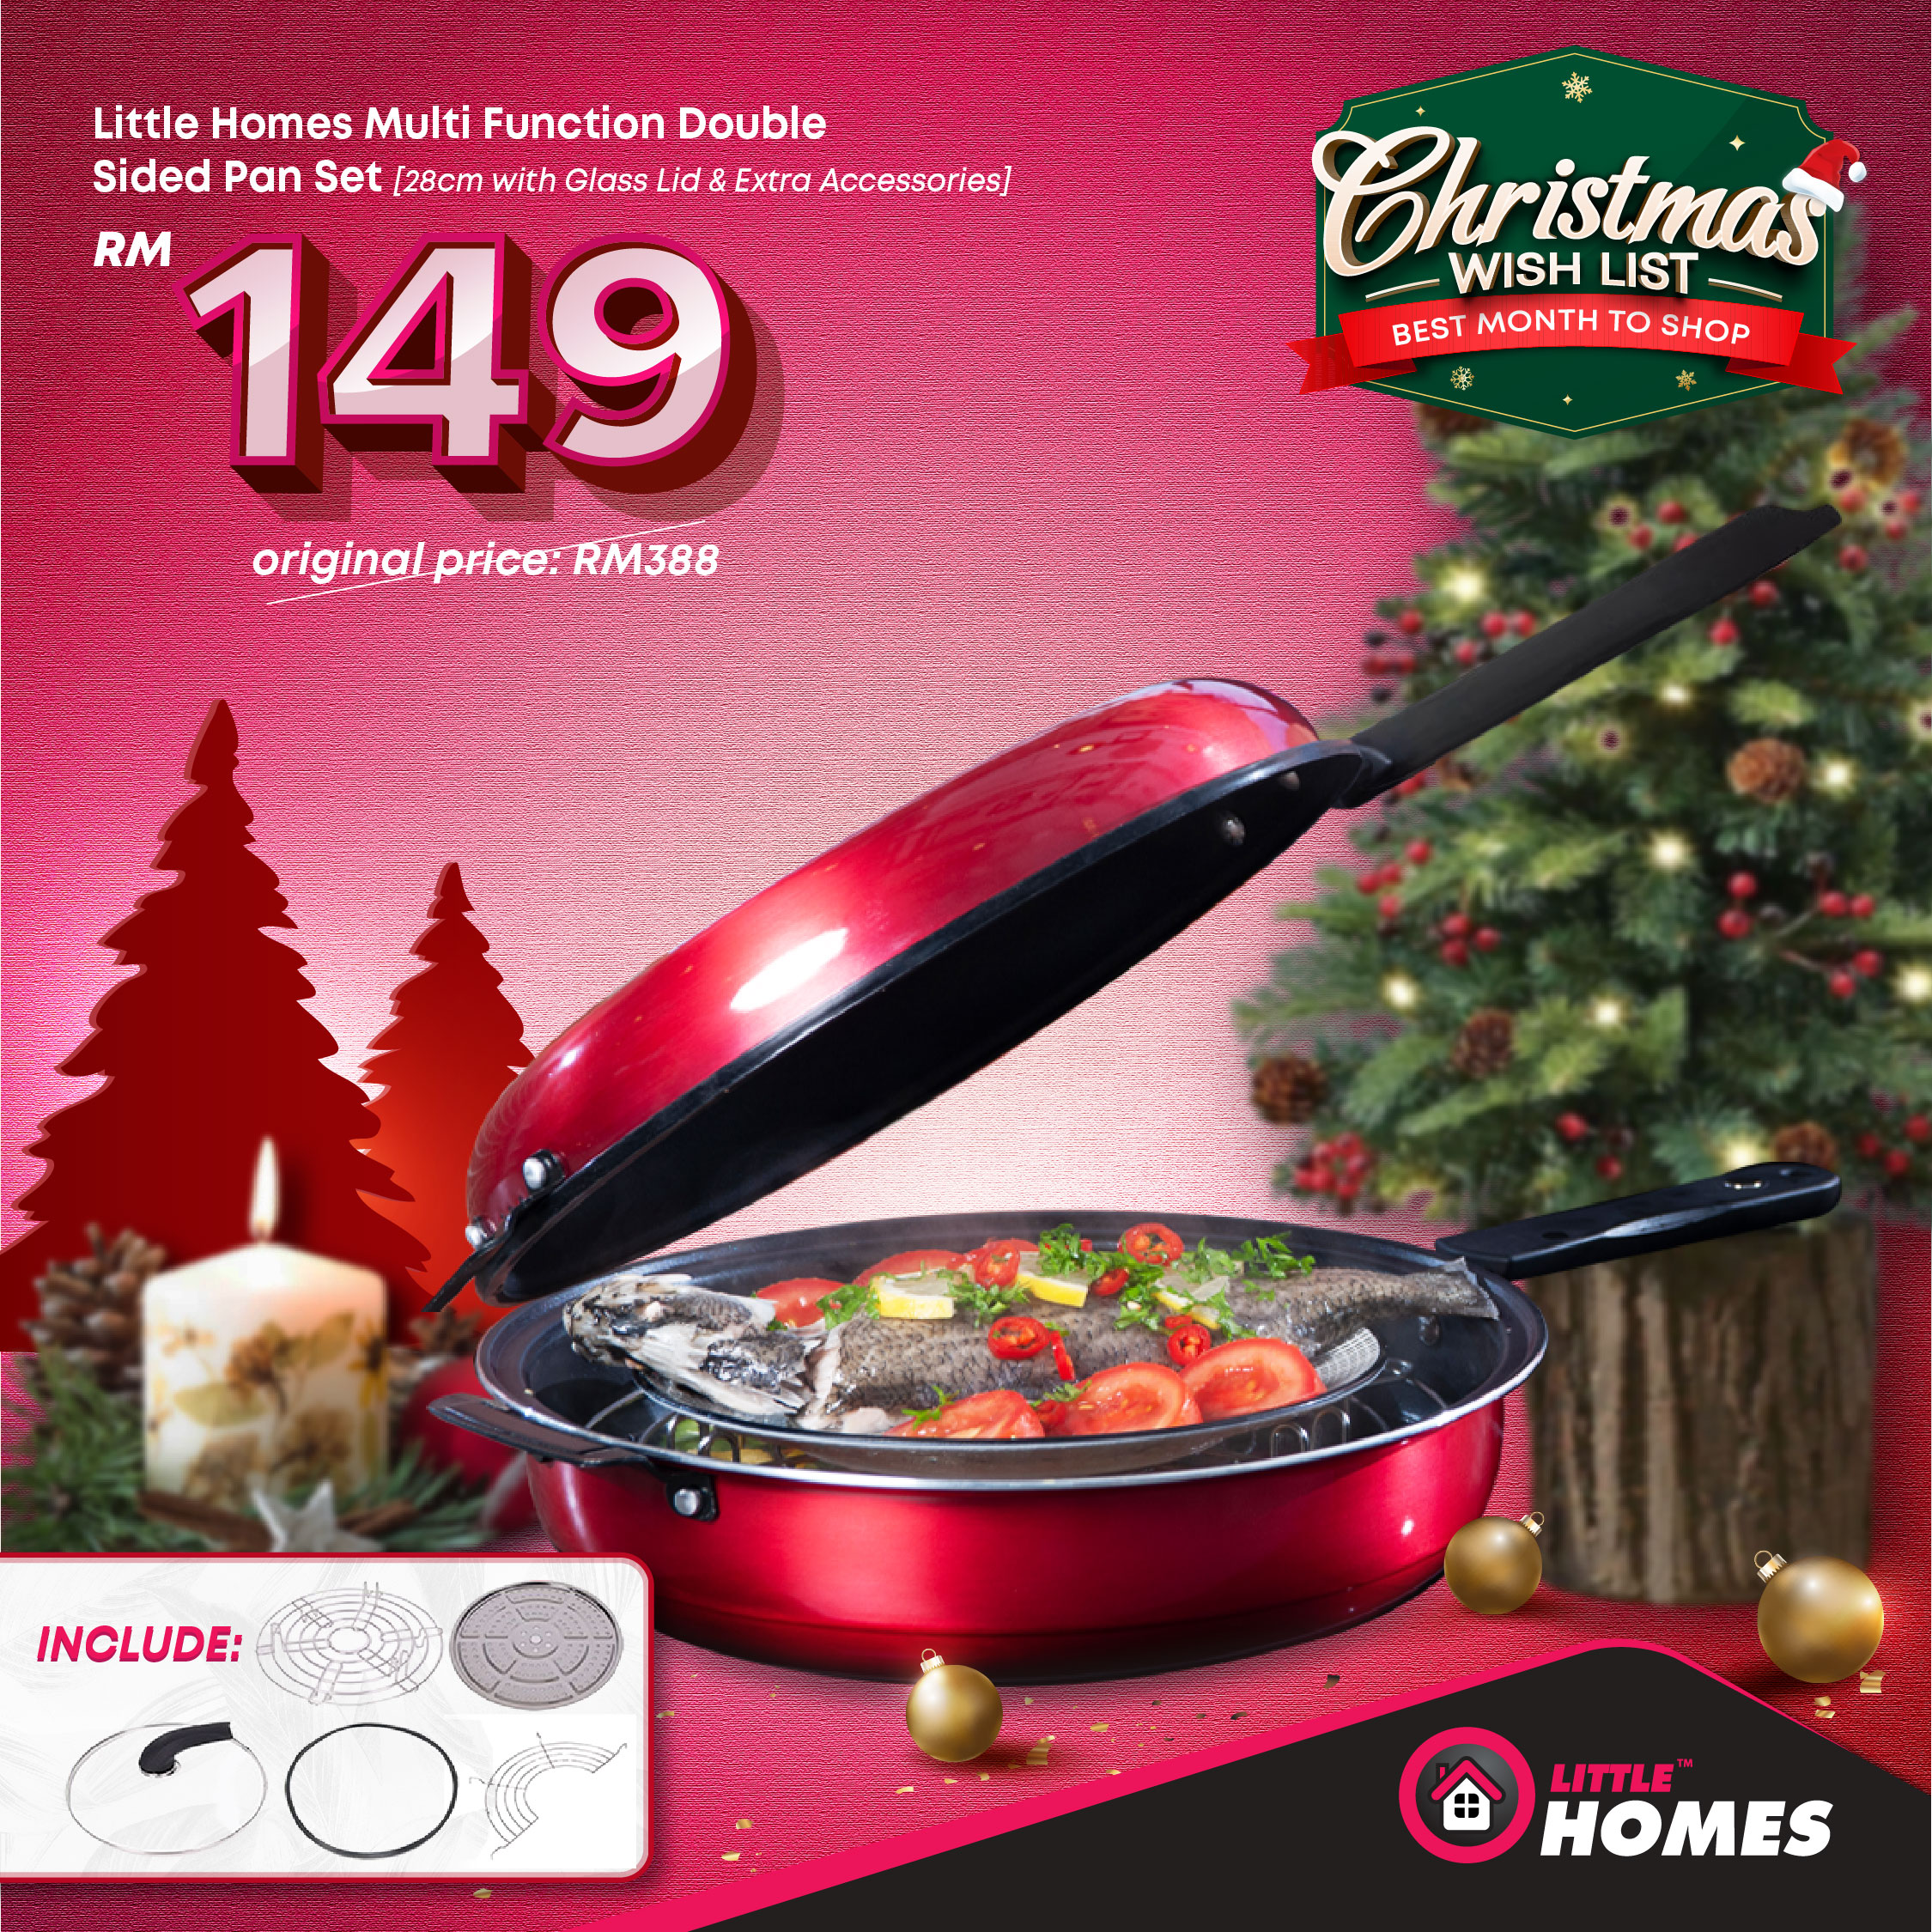 Little Homes Multi Function Double Sided Pan Set 28cm with Glass Lid & Extra Accessories 🍳𝐌𝐮𝐥𝐭𝐢-𝐅𝐮𝐧𝐜𝐭𝐢𝐨𝐧 𝐏𝐚𝐧 𝐒𝐞𝐭 now only 𝐚𝐭 𝐑𝐌149